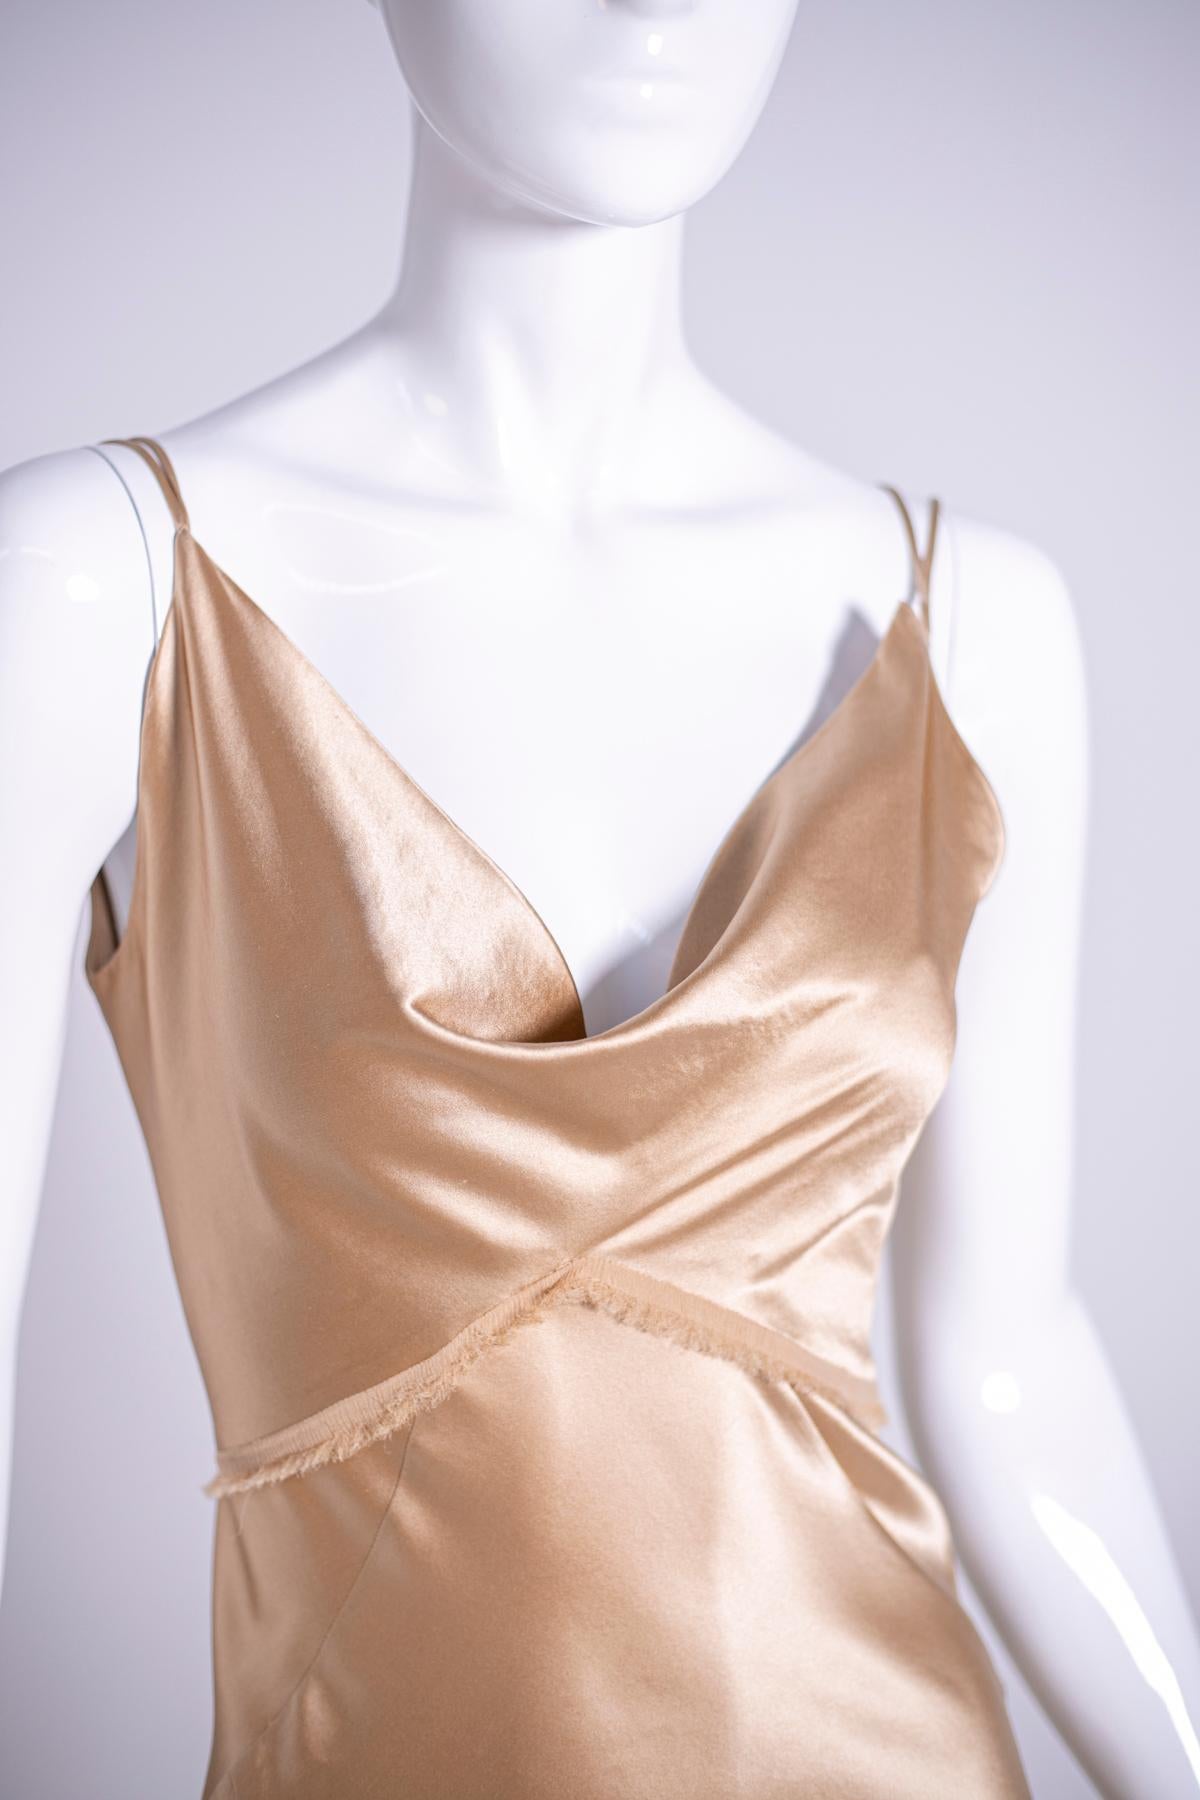 Ermanno Scervino 1990's beige silk evening dress.
Gorgeous vintage long evening dress Ermanno Scervino, in beige silk, with soft neckline on the chest, double and thin braces and a small tail at the back that make this dress simple but